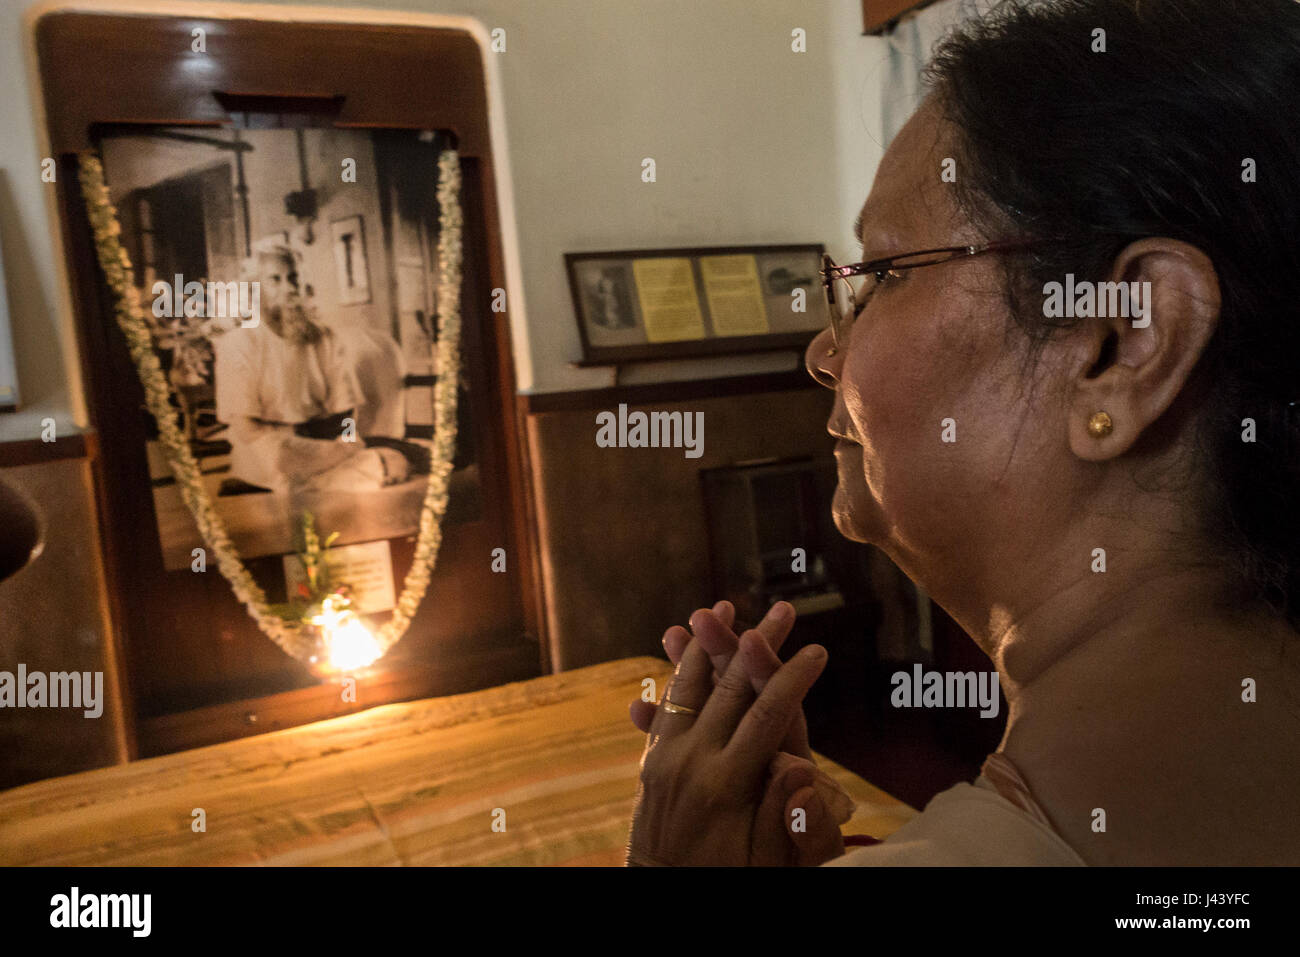 Kolkata, India. 9th May, 2017. An Indian woman visits the museum at Nobel laureate poet Rabindranath Tagore's house during the celebration on the 156th birth anniversary of Tagore in Kolkata, capital of eastern Indian state West Bengal on May 9, 2017. Tagore was the first Asian to win Nobel Prize for his collection of poems 'Geetanjali' in 1913. Credit: Tumpa Mondal/Xinhua/Alamy Live News Stock Photo